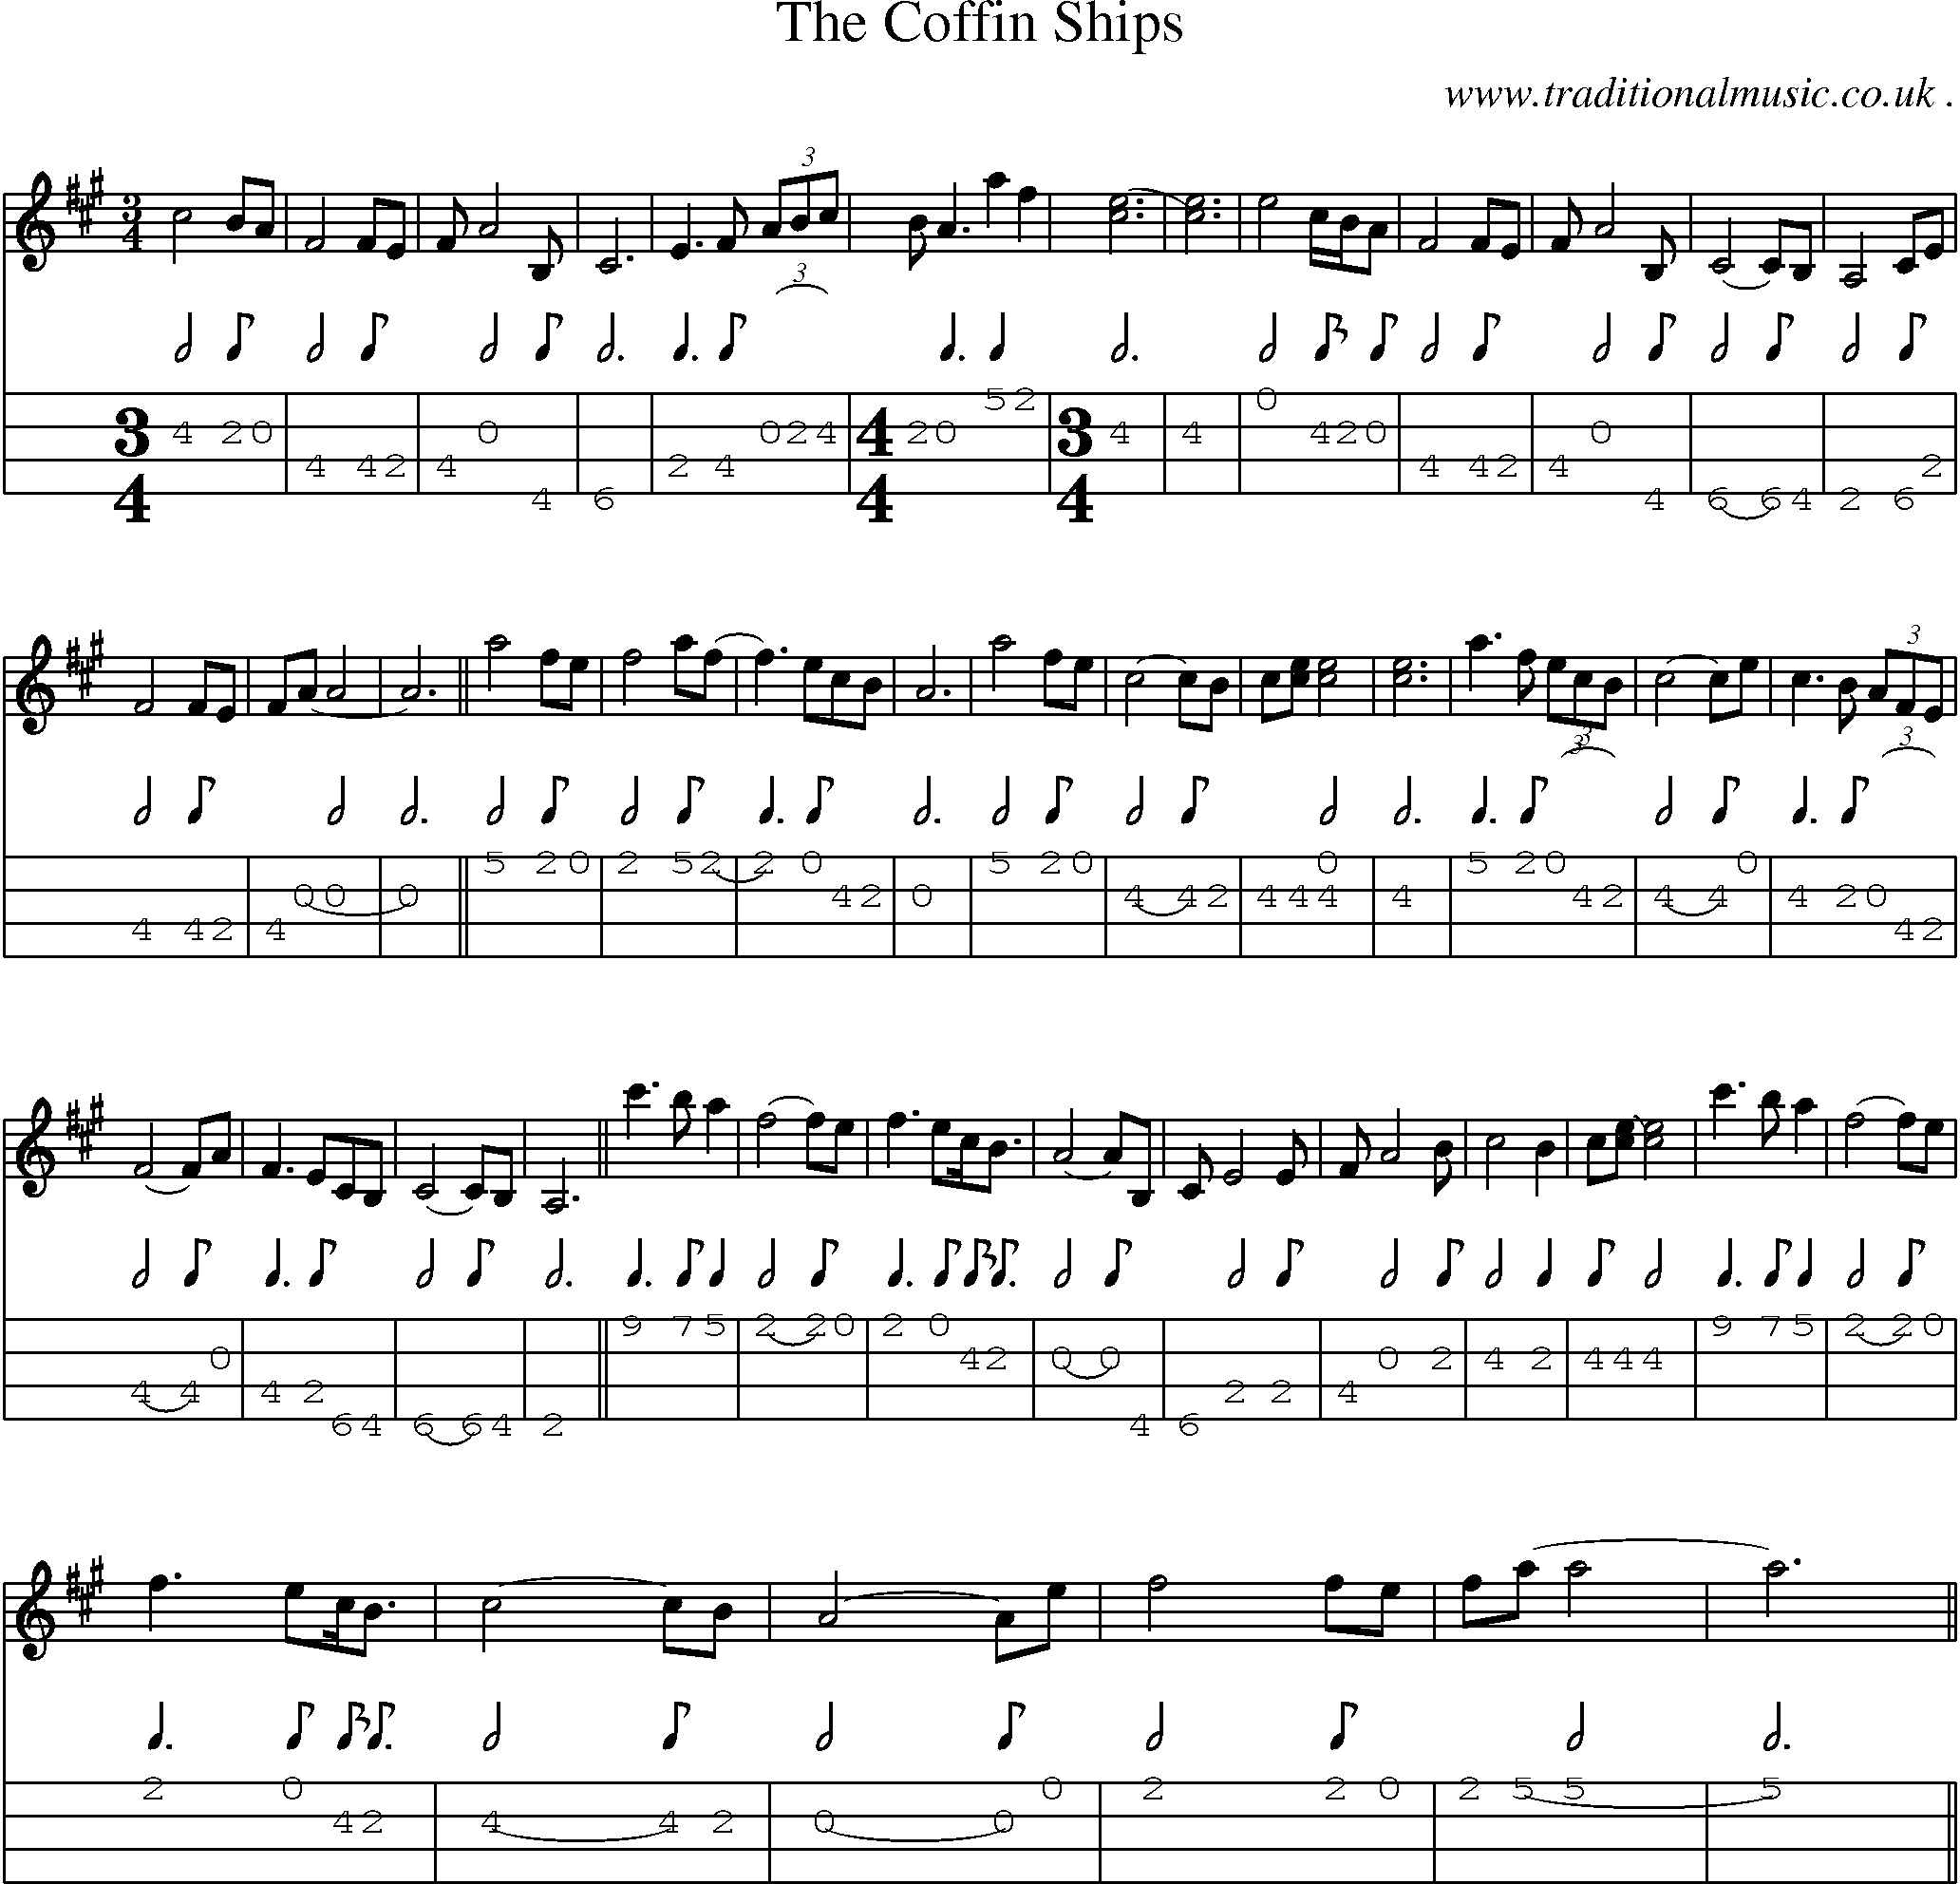 Sheet-Music and Mandolin Tabs for The Coffin Ships